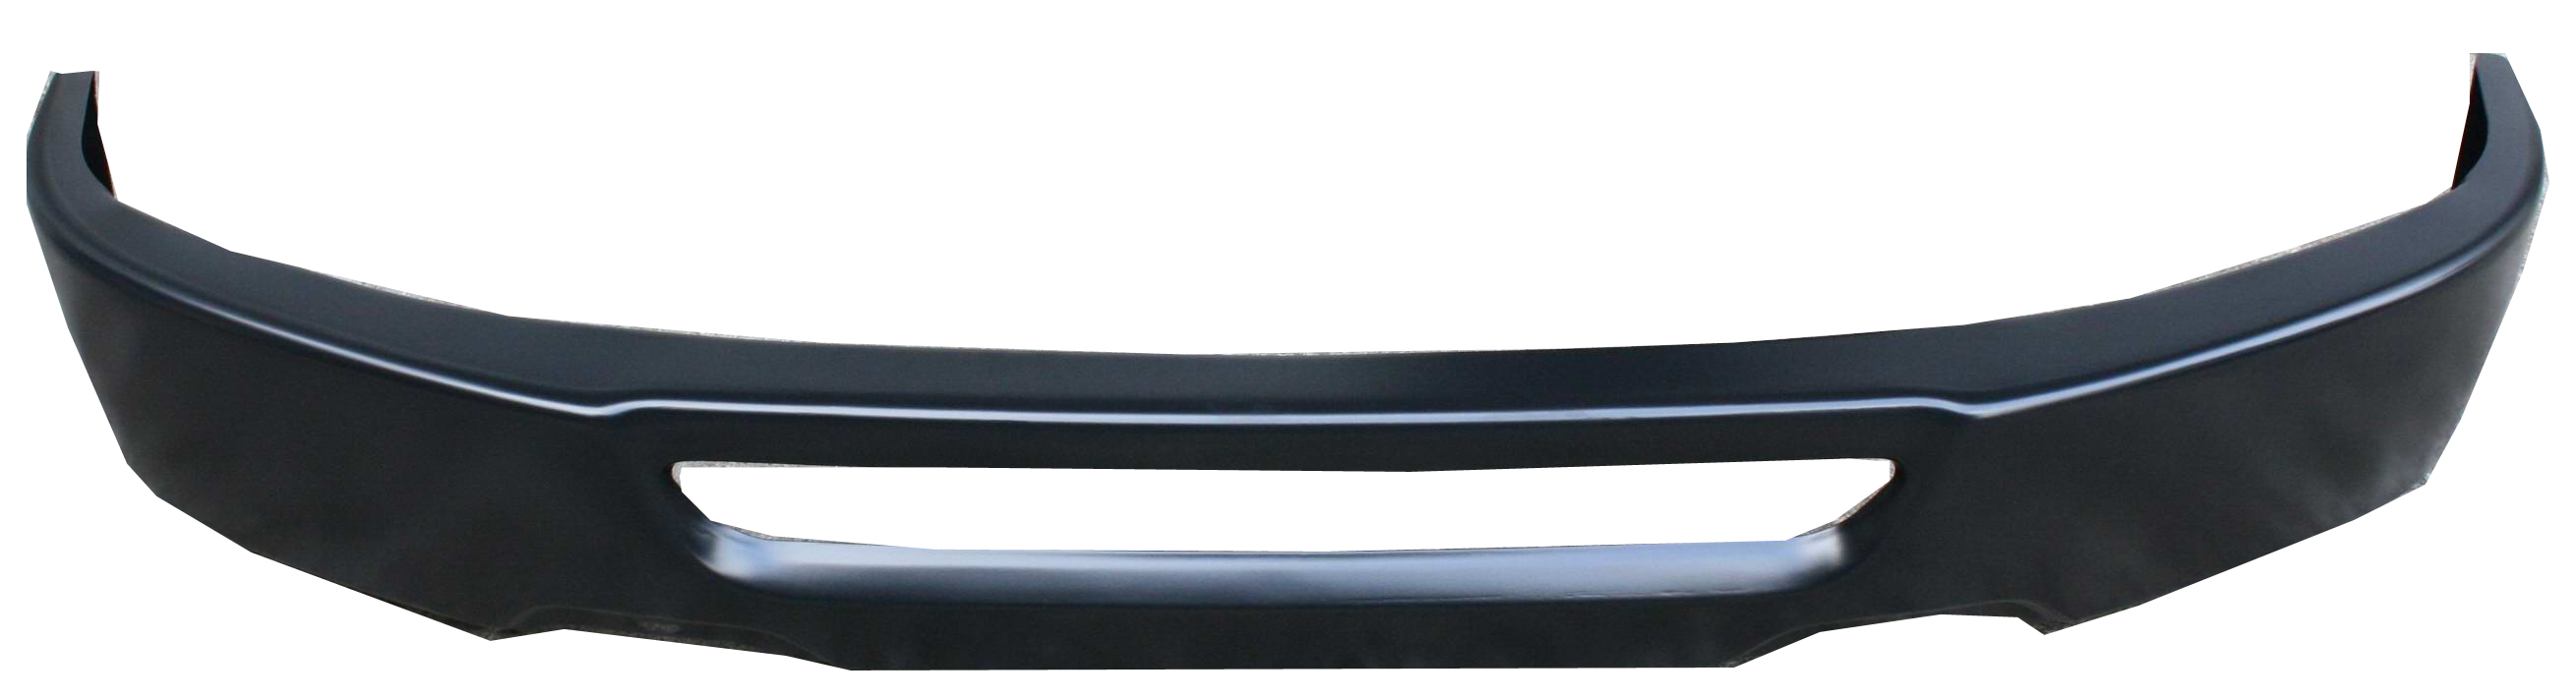 Aftermarket METAL FRONT BUMPERS for FORD - F-150, F-150,05-08,Front bumper face bar